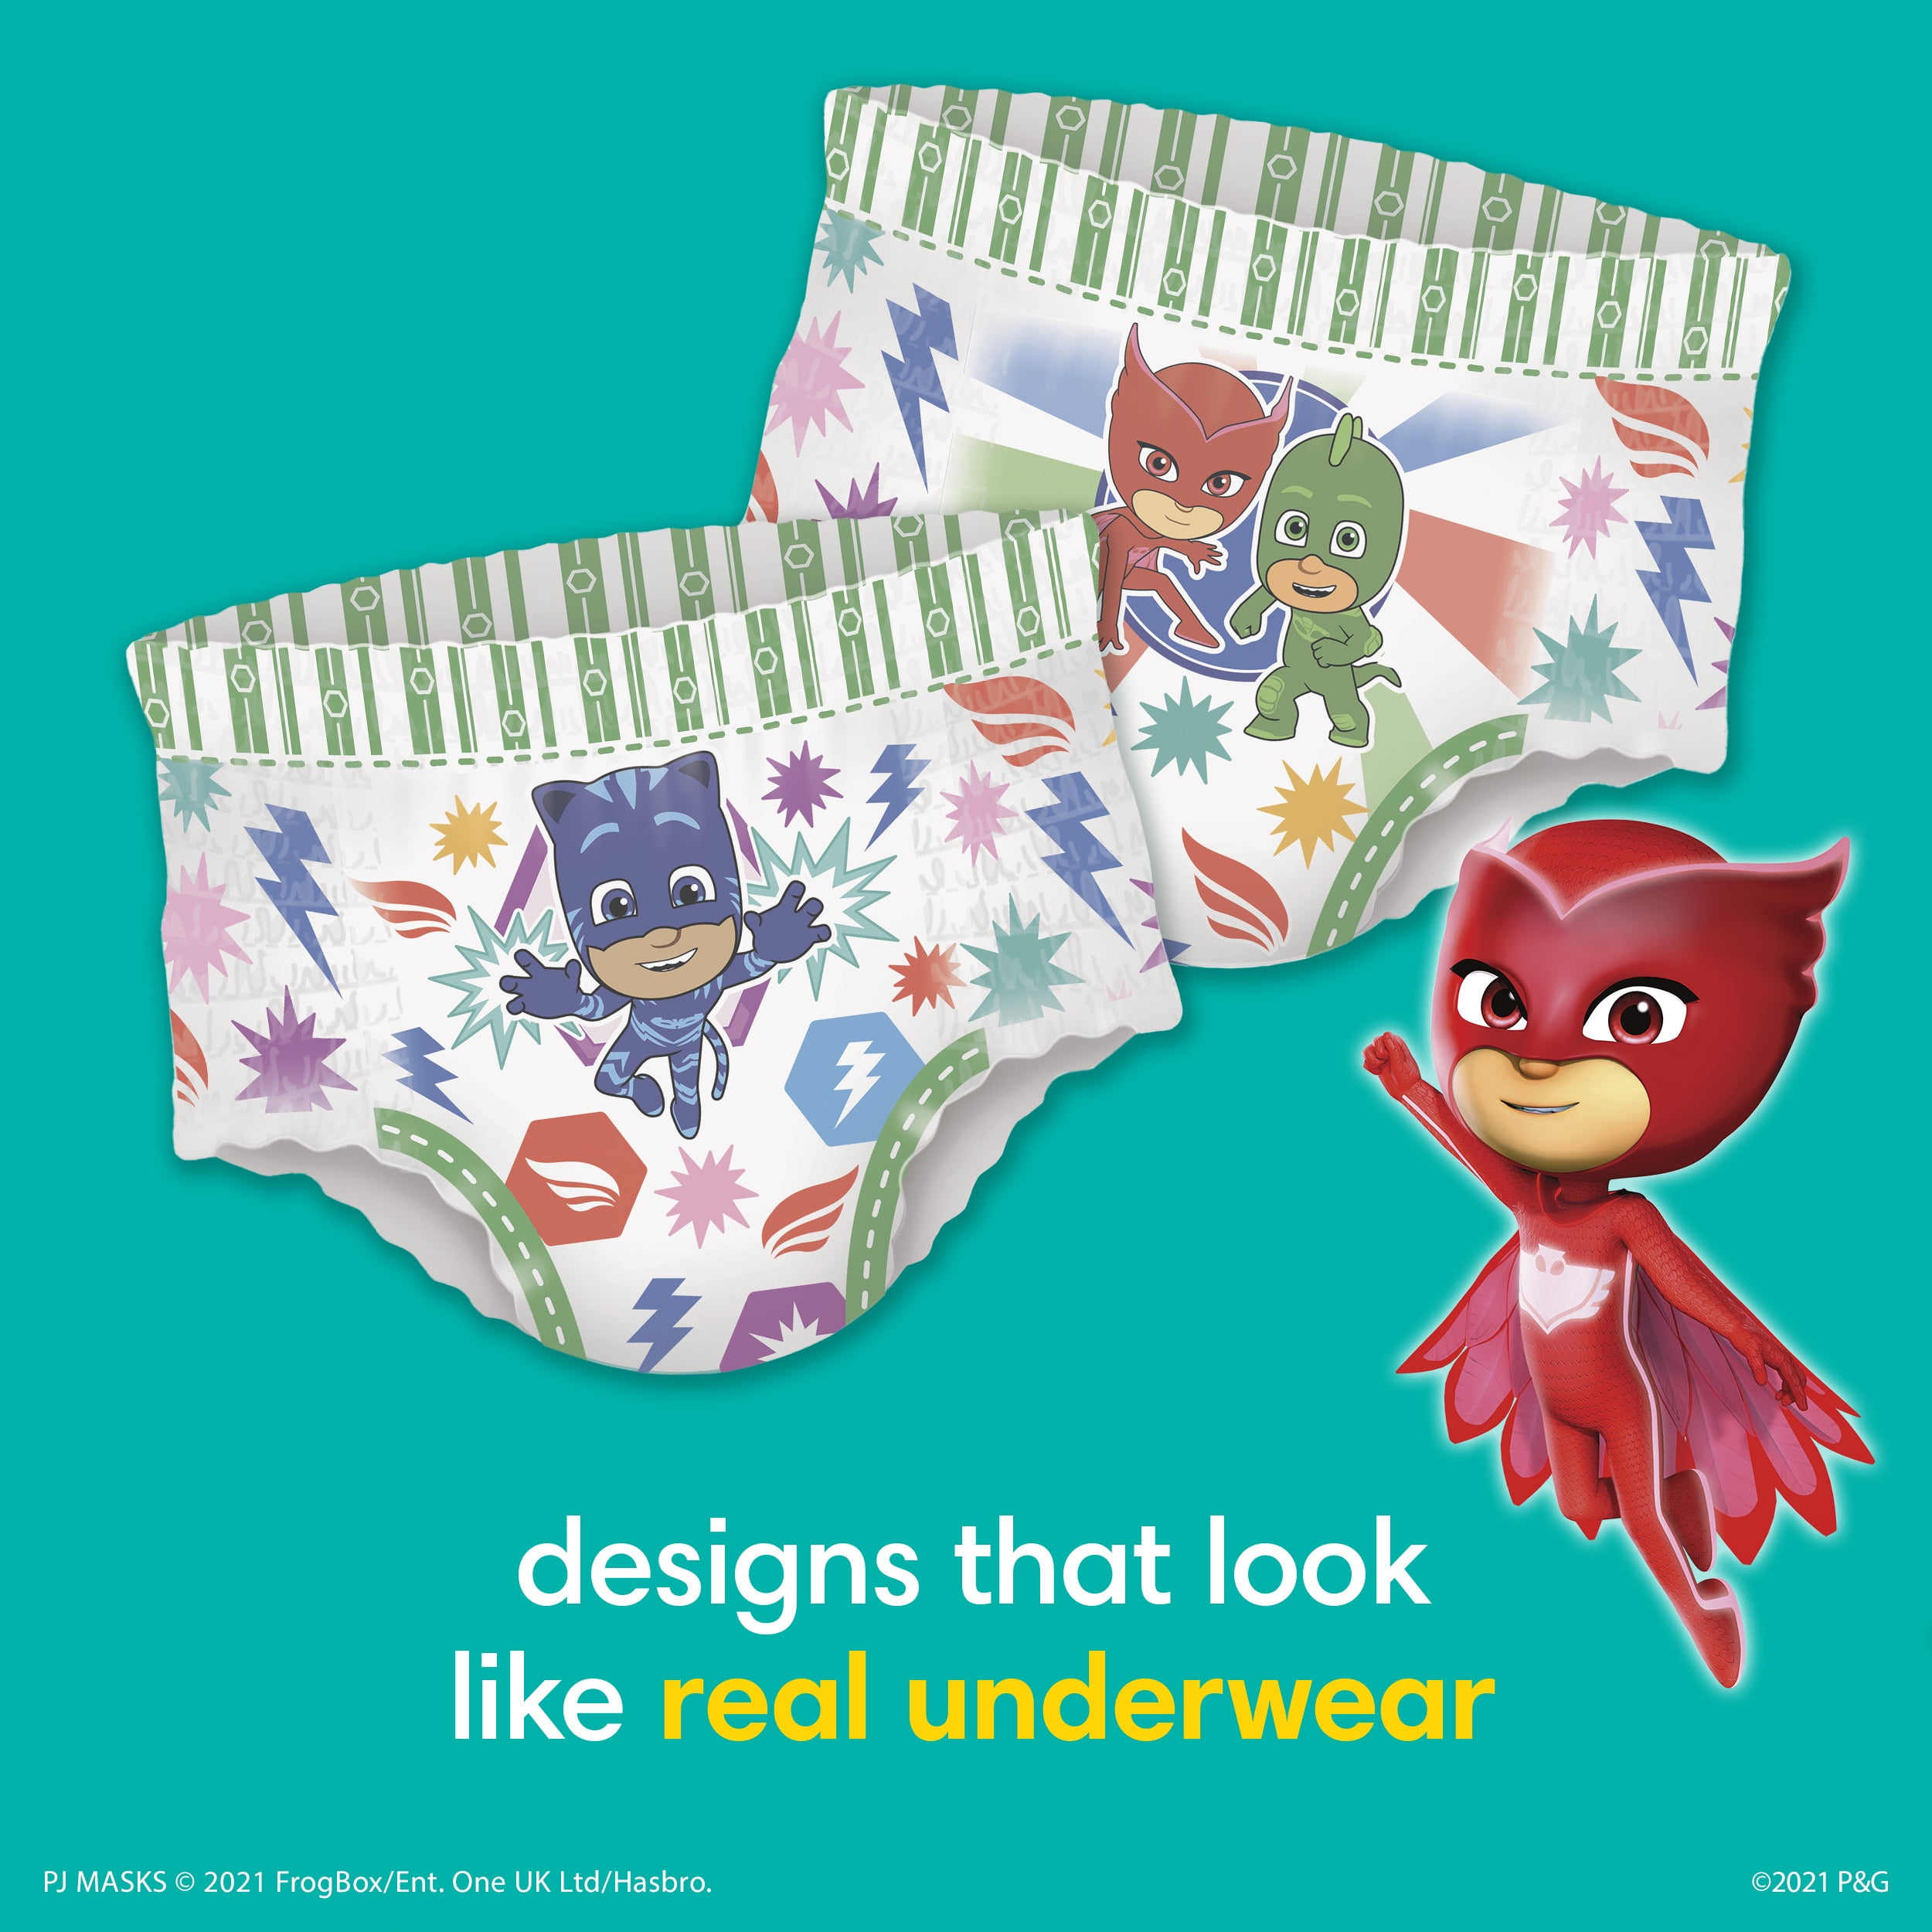 Pampers Easy Ups PJ Masks Training Pants Boys Size 3T/4T 22 Count